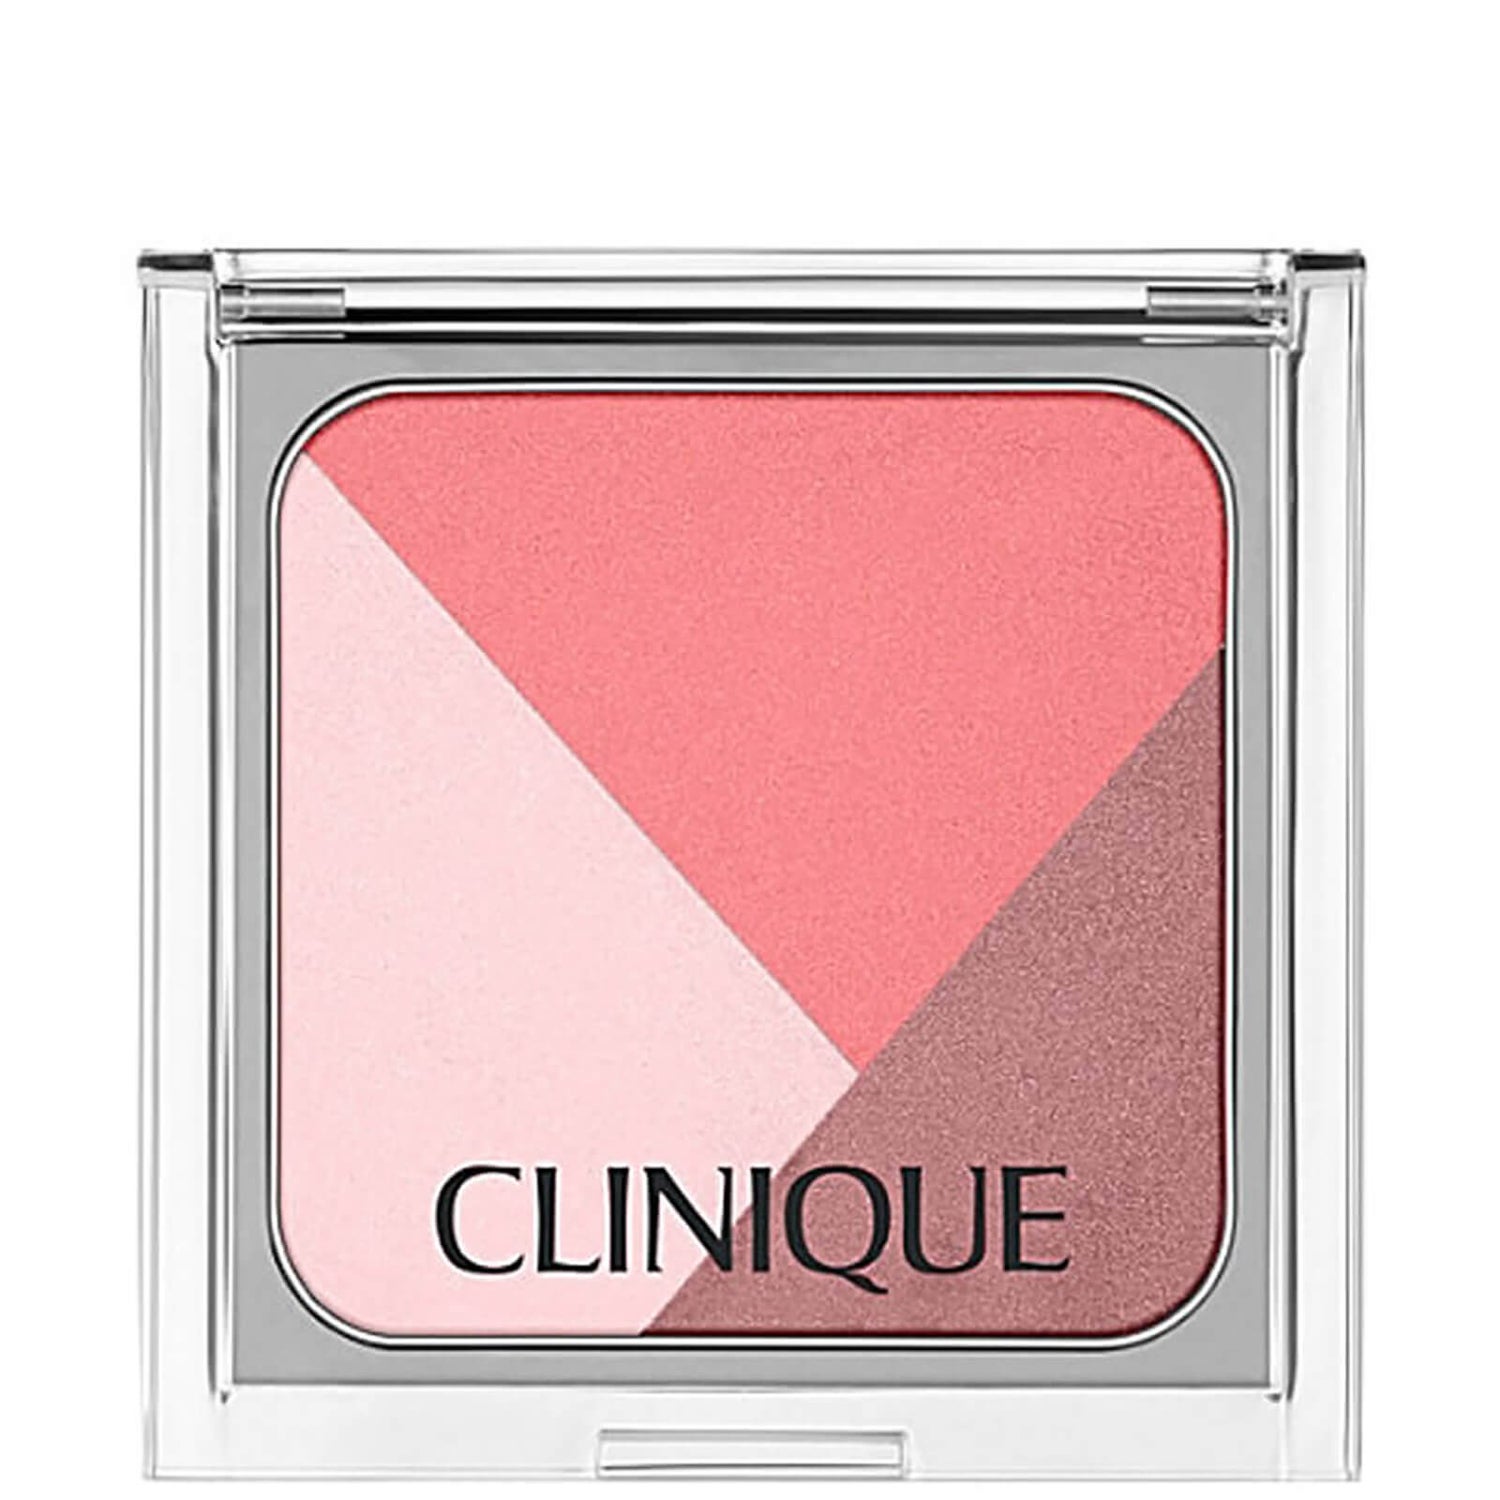 Clinique Sculptionary Cheek Contouring Palette -poskiväripaletti, Defining Roses